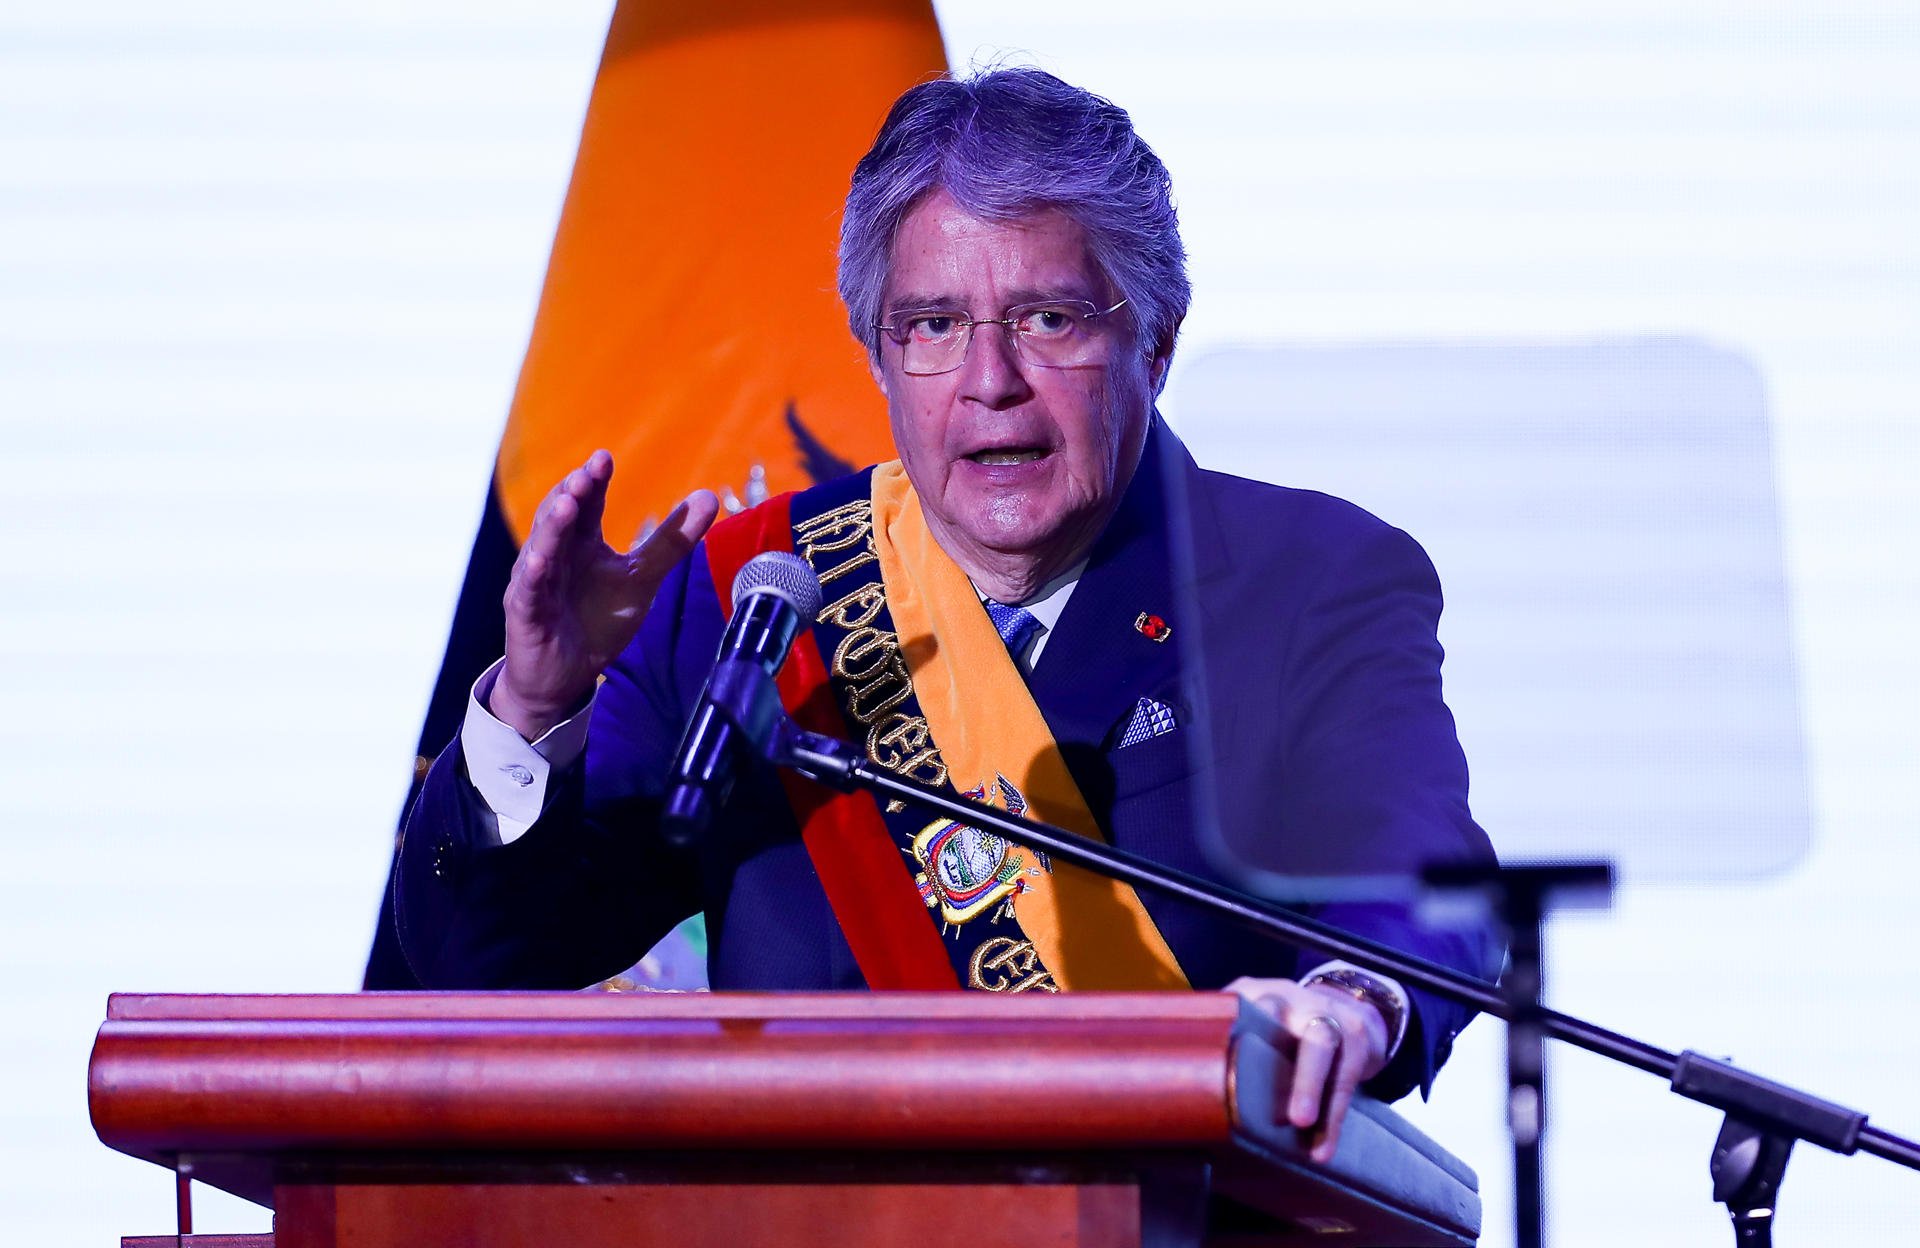 The President of Ecuador, Guillermo Lasso, presents his report to the Nation after the death cross that closed the National Assembly, today at the Government Platform, in Quito (Ecuador).  BLAZETRENDS/Jose Jacome